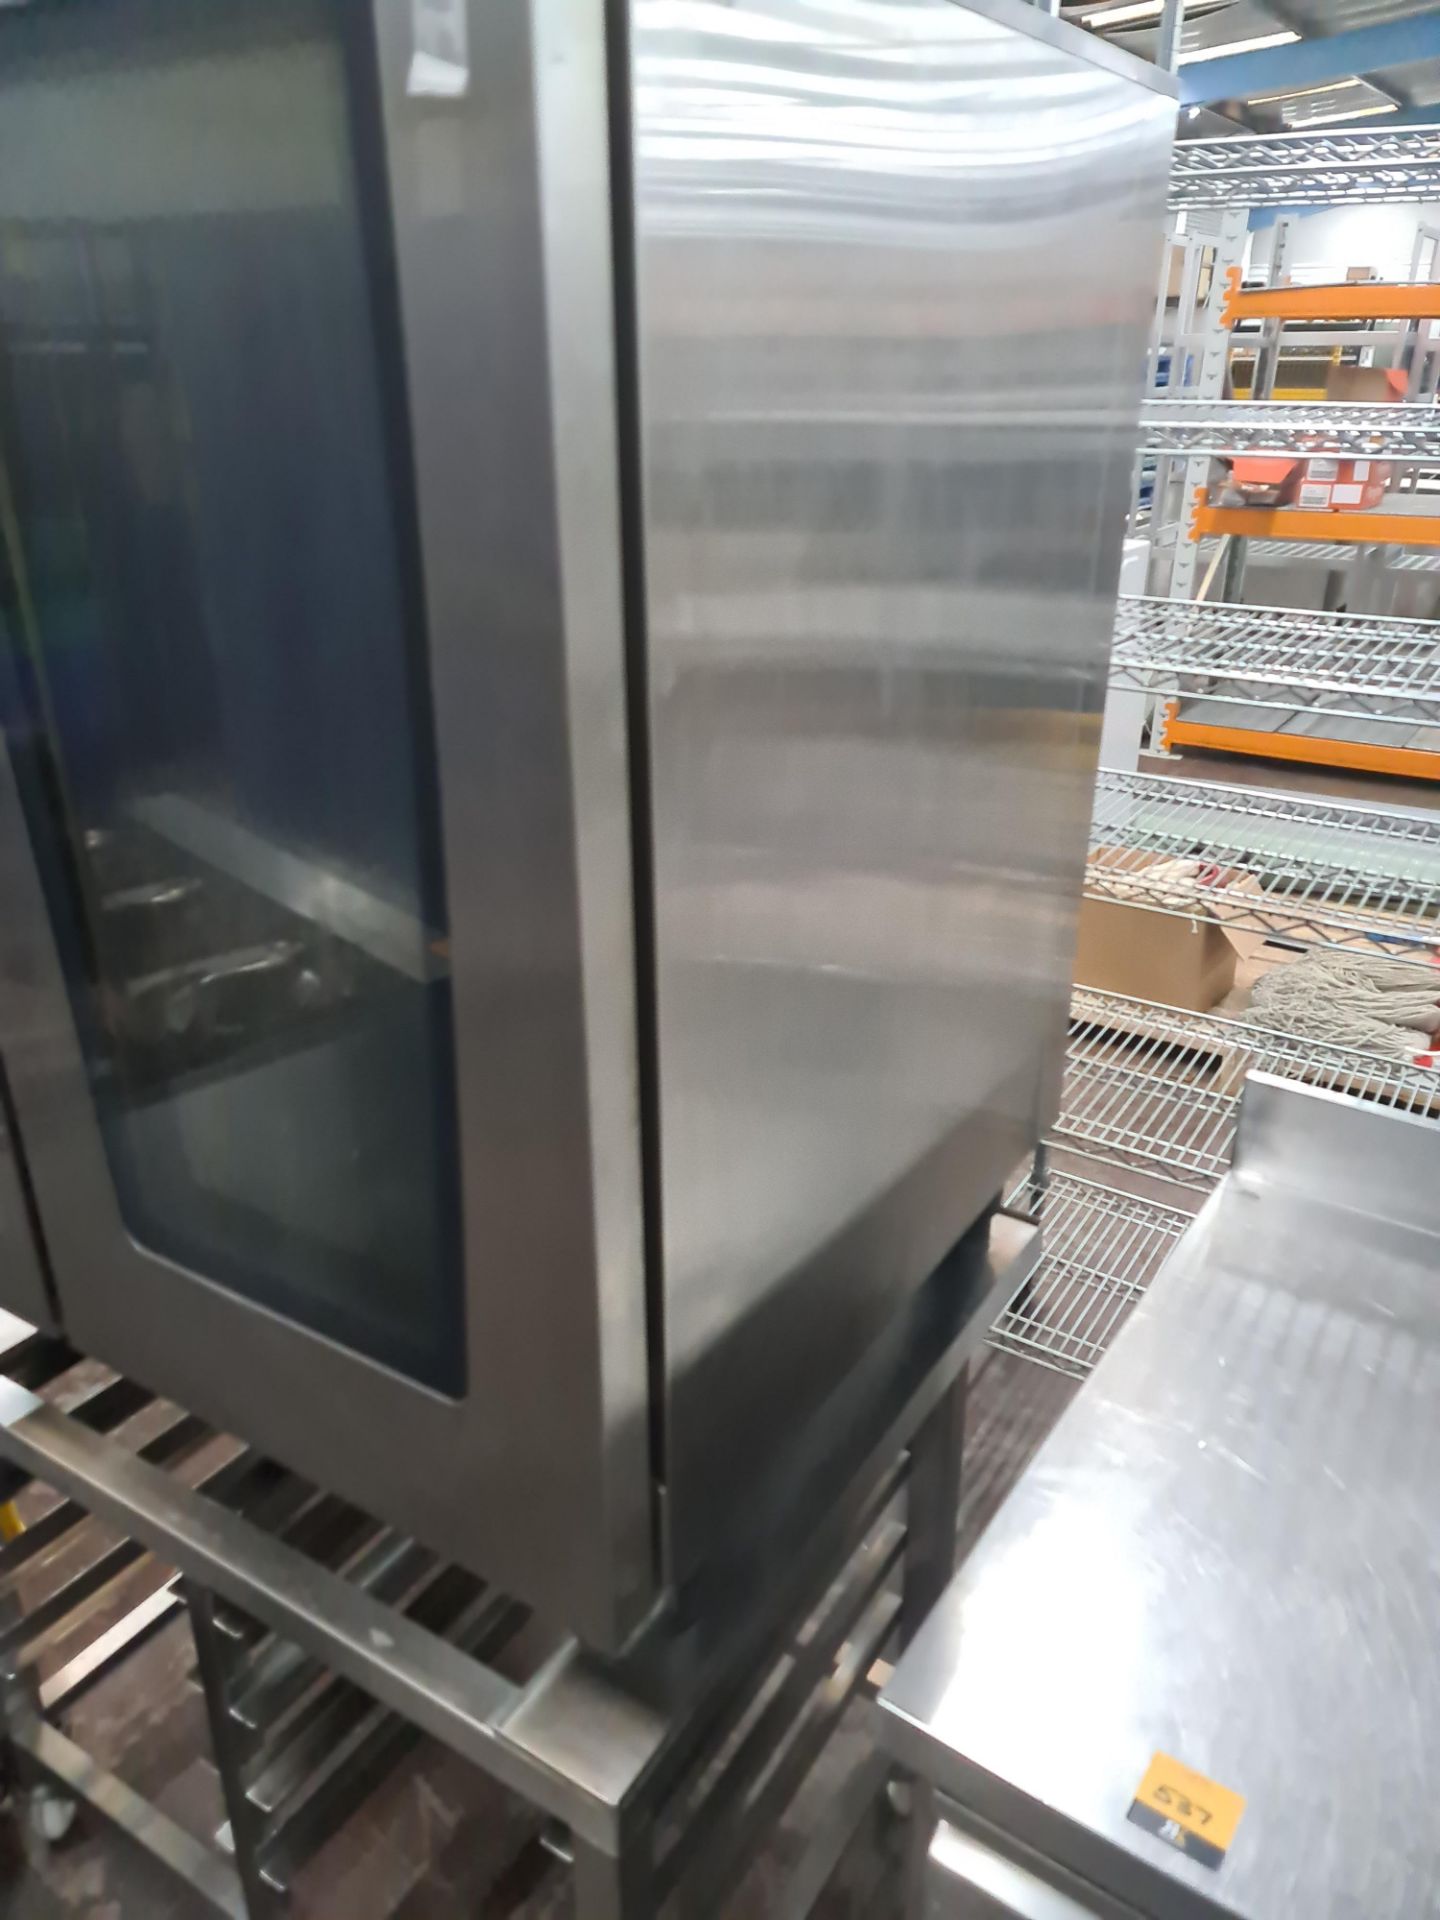 Rational self-cooking centre 10-grid oven model SCCWE101 including dedicated mobile stand with tray - Image 2 of 10